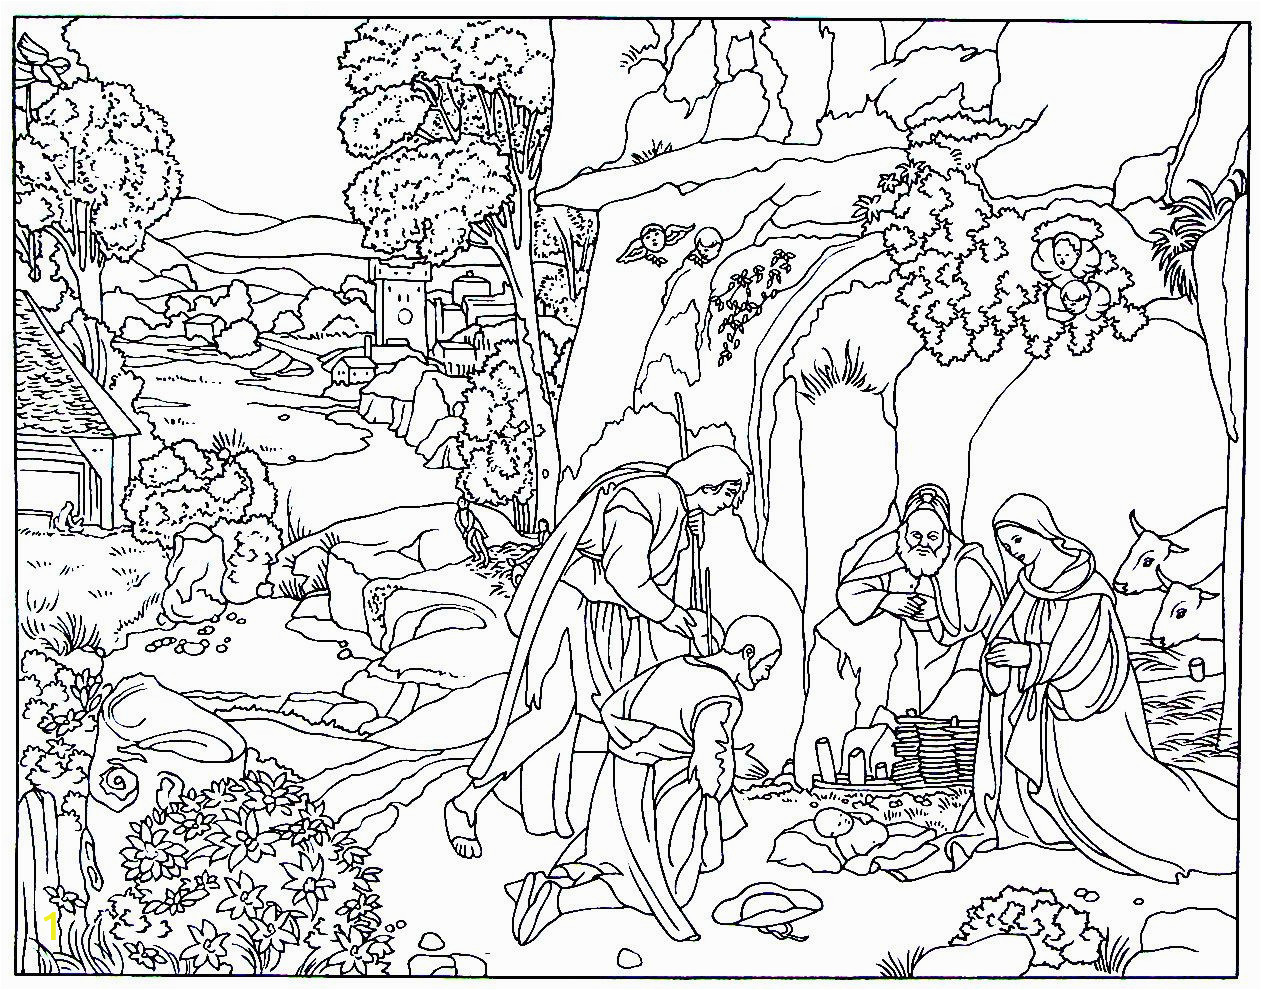 Shepherds and Angels Coloring Page the Adoration Of the Shepherds Renaissance Painting by